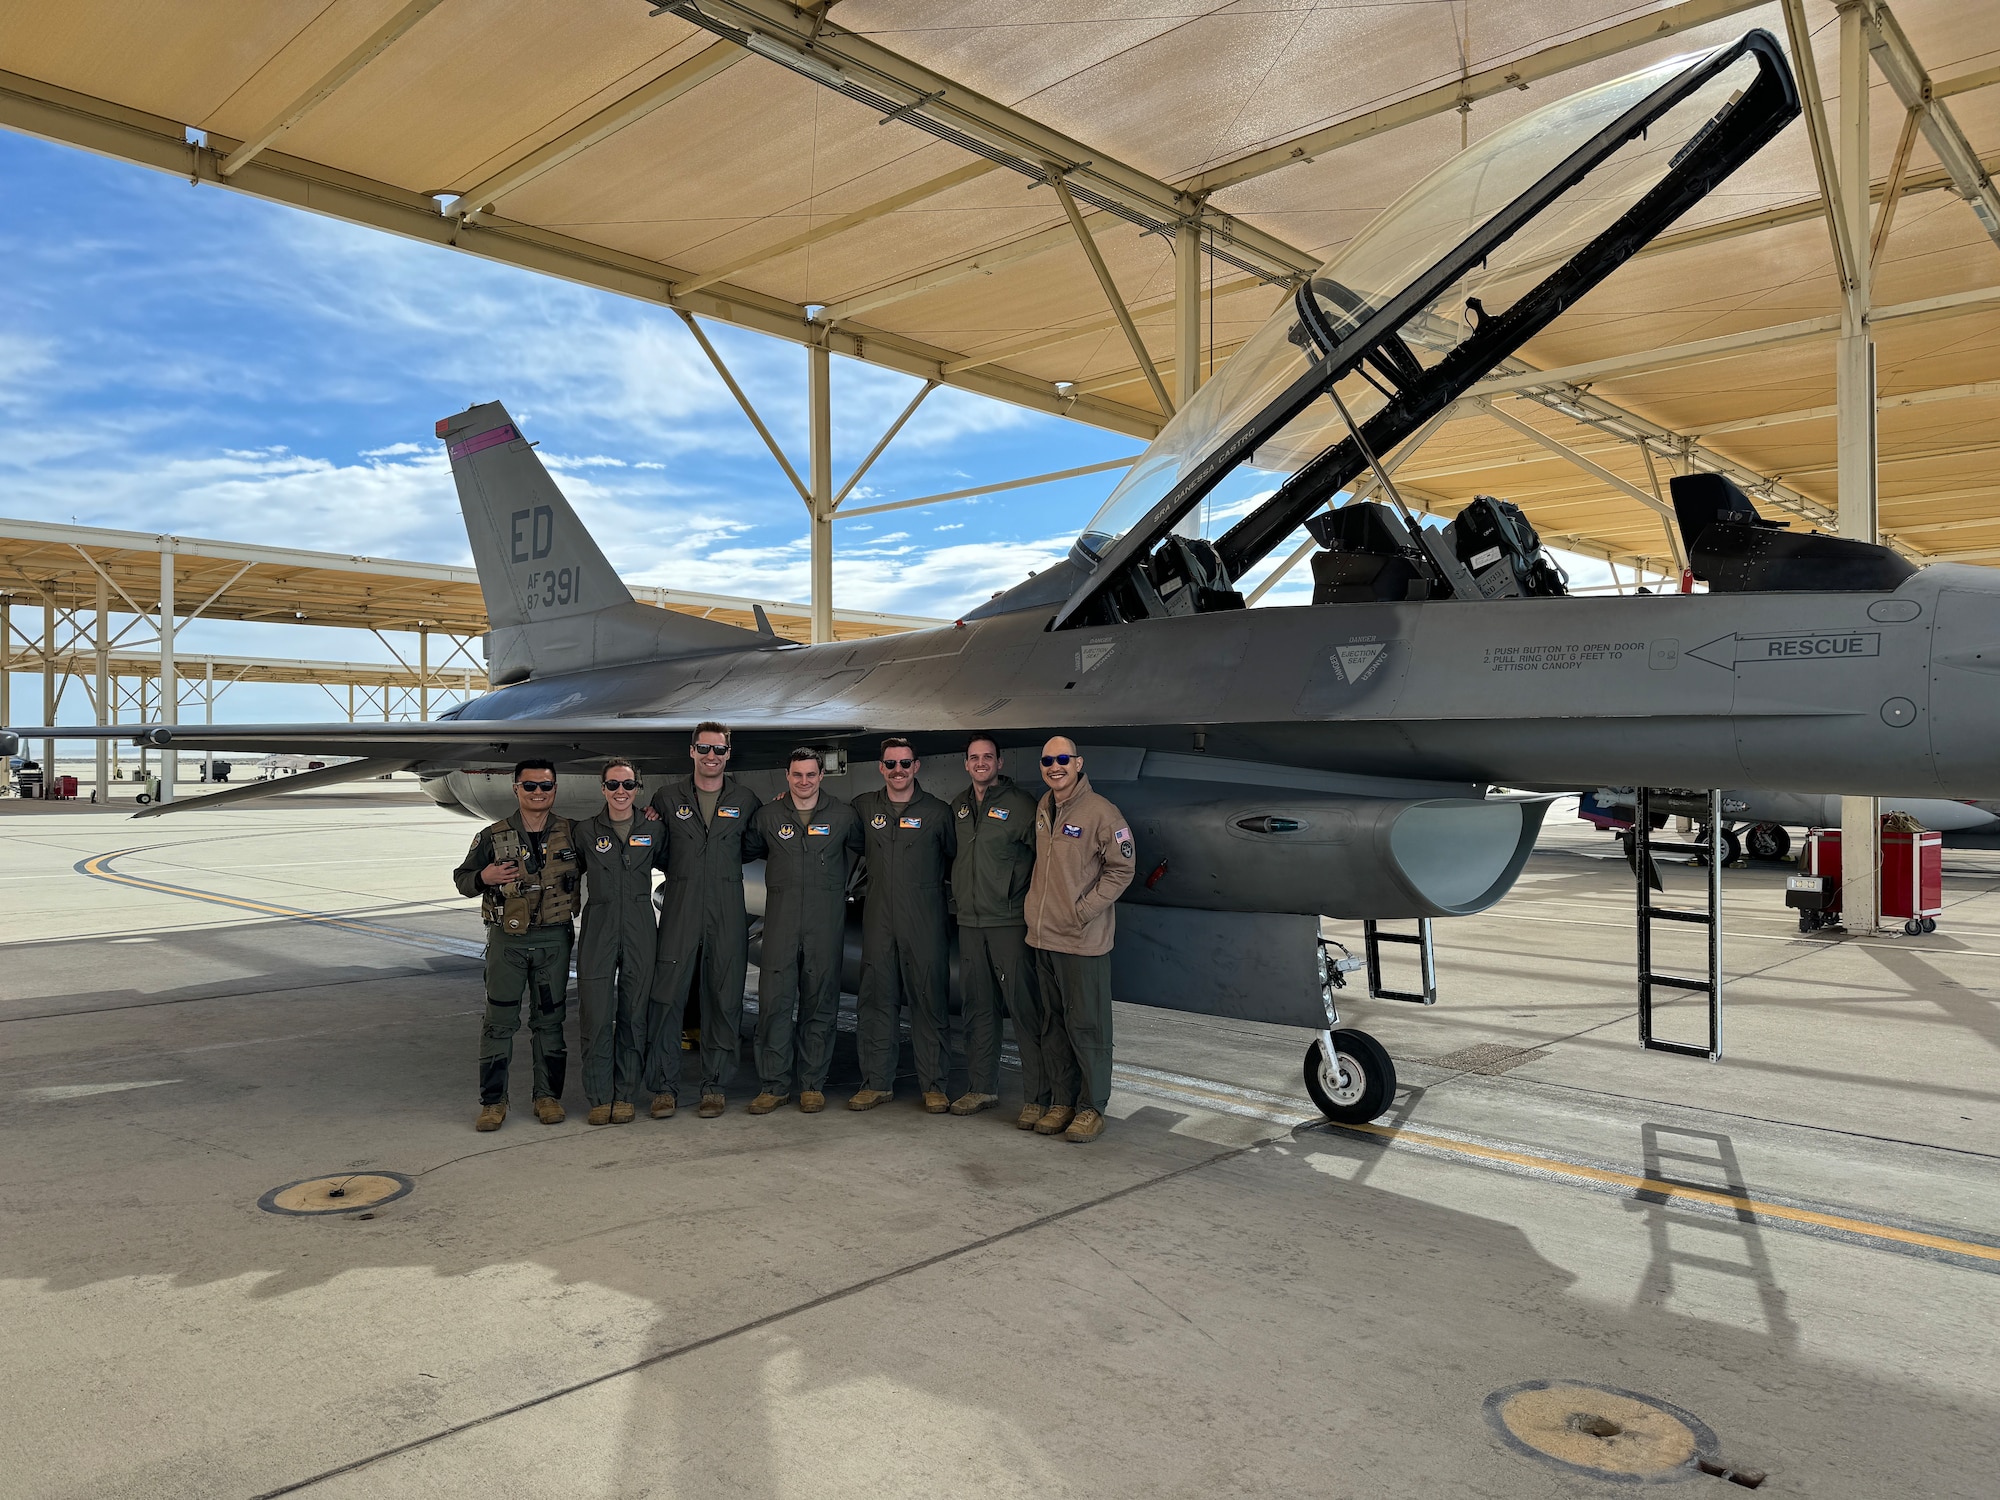 U.S. Air Force Test Pilot School students prepare to flight test the Integrated Cockpit Sensing, or ICS, system on an F-16 at Edwards Air Force Base, California, March 12, 2024. An Air Force Research Laboratory team developed the ICS system to provide an airworthy platform for comprehensive physiological, life-support and environmental monitoring to improve pilot safety and performance. The system has helmet-based, base layer and life- support sensors, ensuring holistic information on the pilot and operating environment during flight. (U.S. Air Force photo / Ethan Blackford)